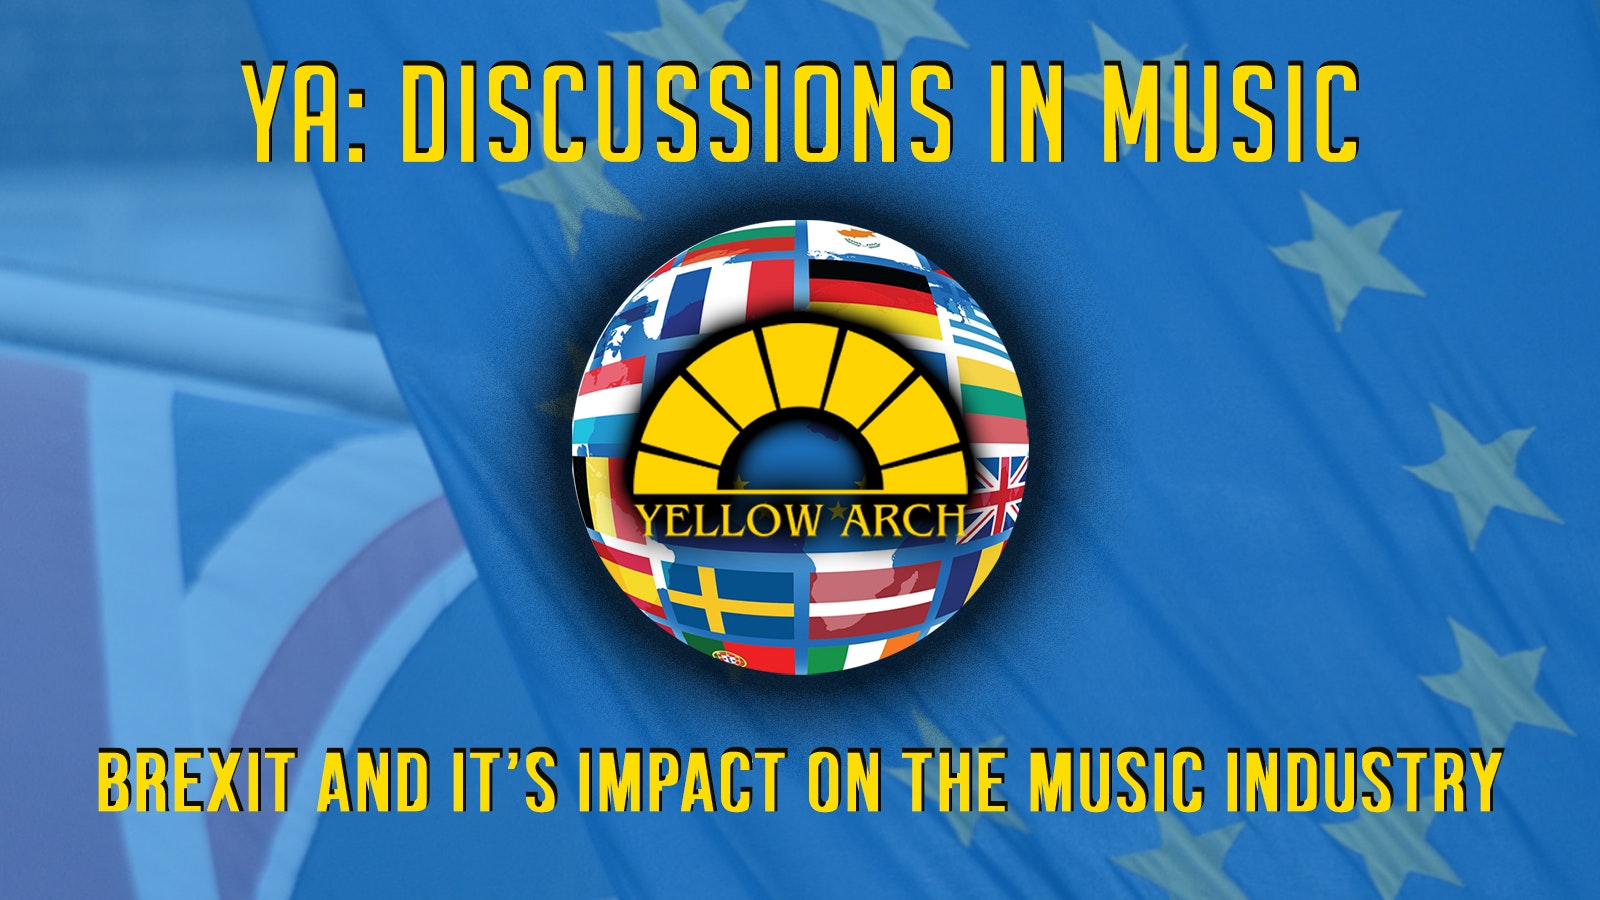 Brexit and It’s Impact on the Music Industry